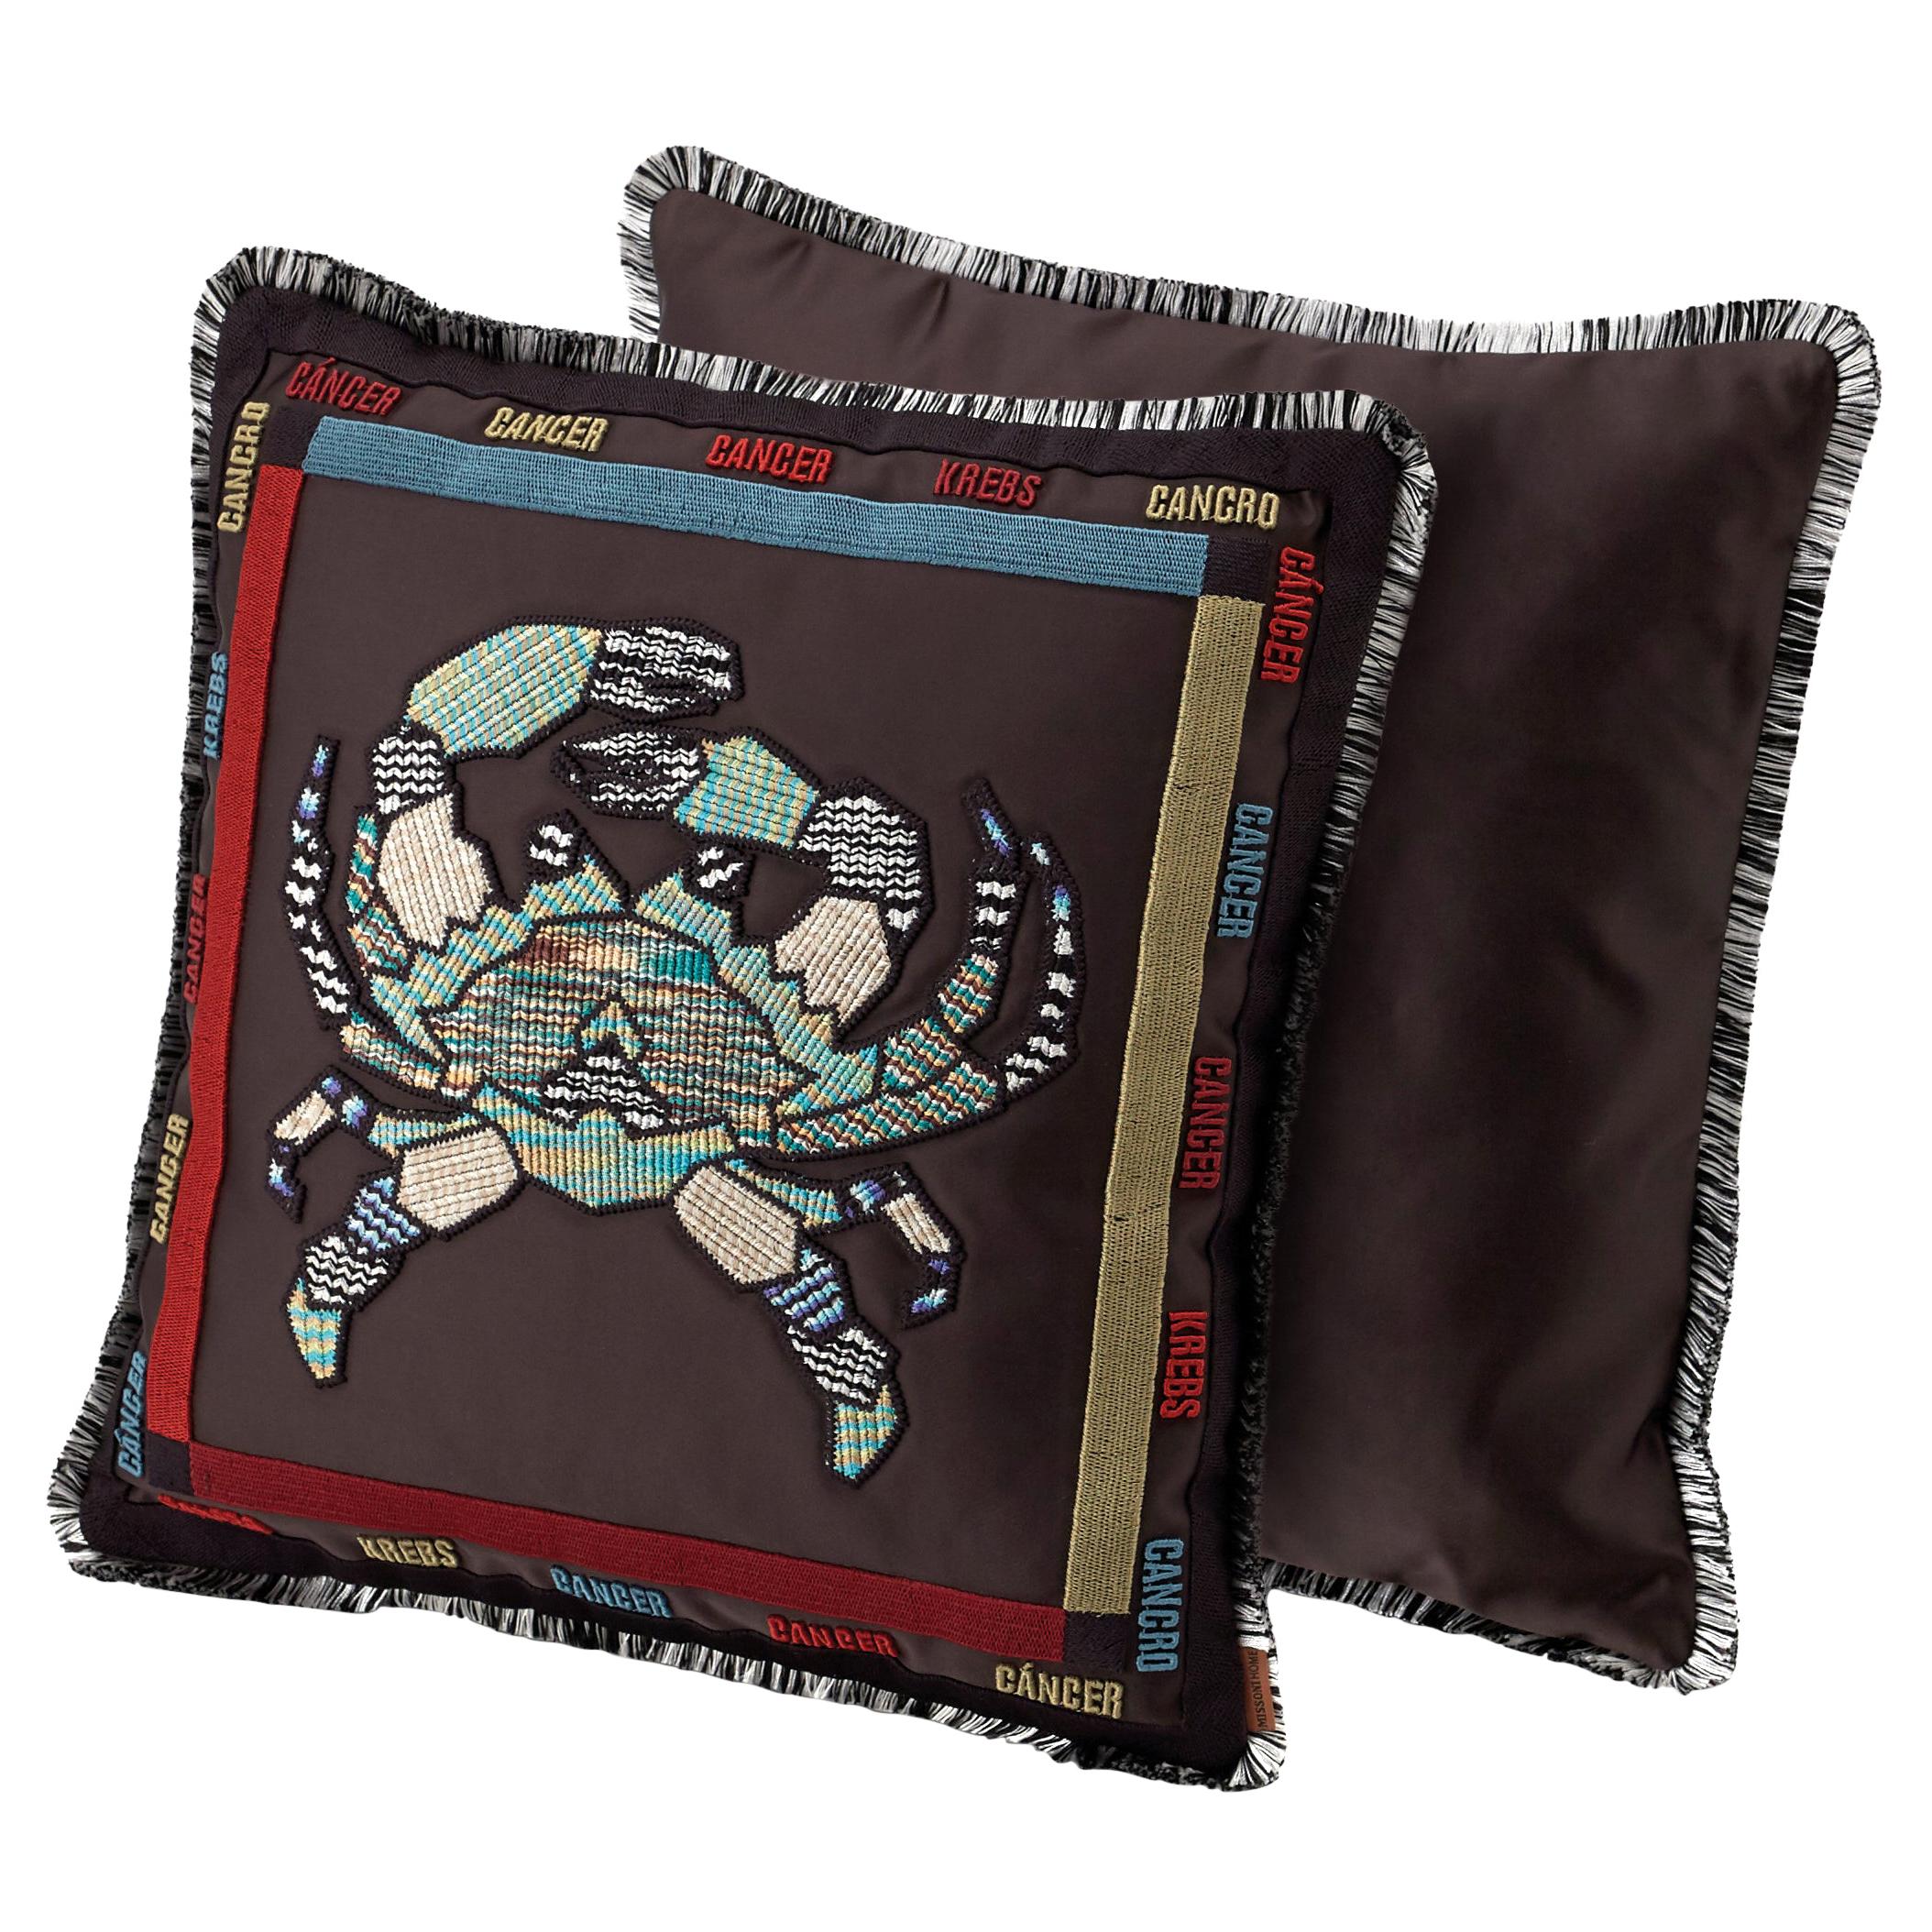 Constellation Embroidered Cushion For Sale